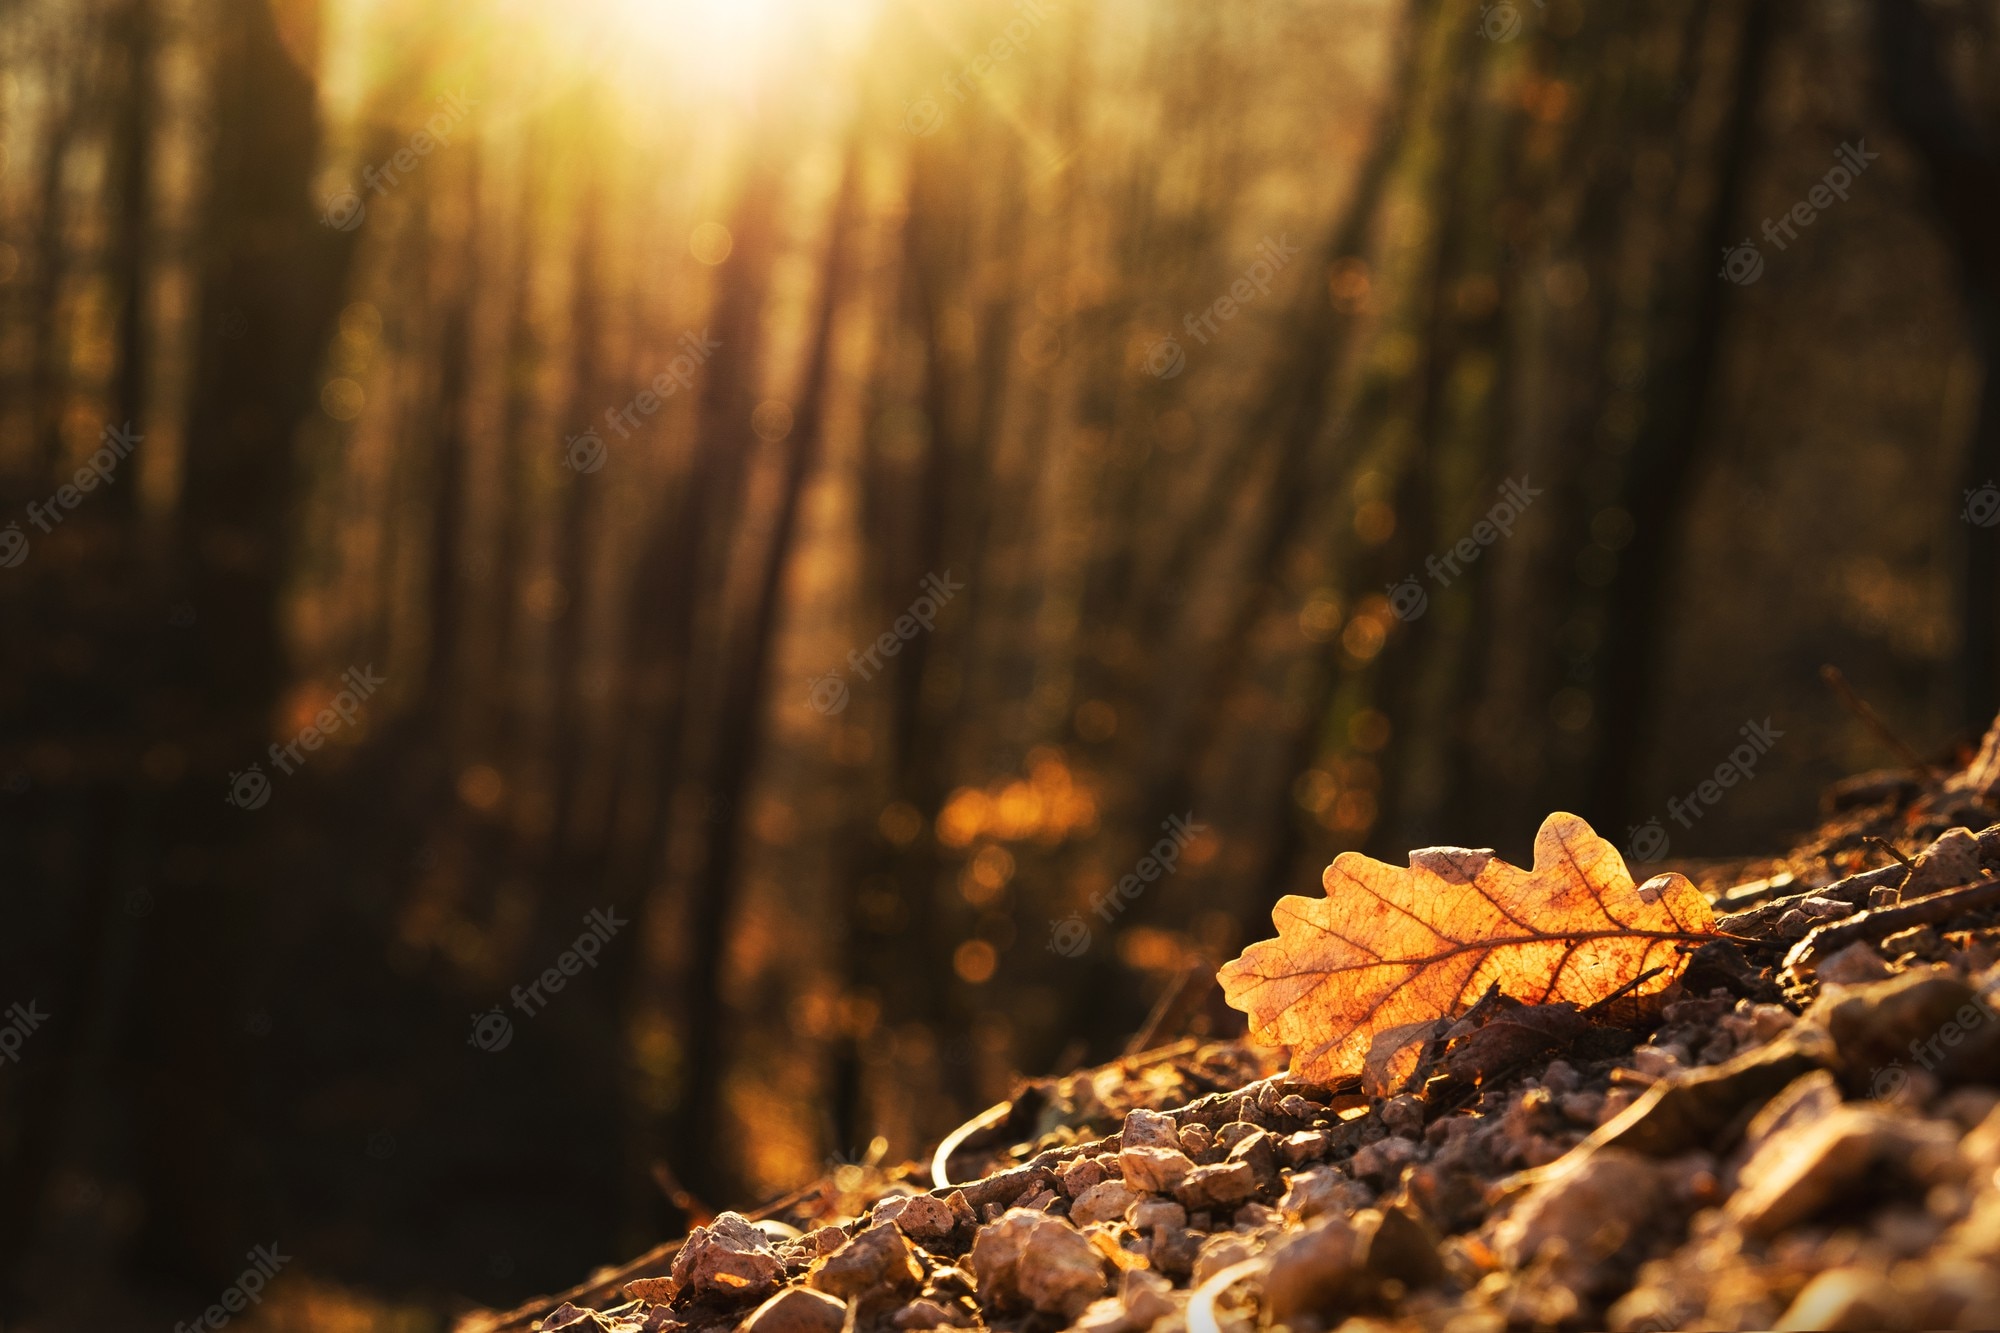 Free Photo. Selective focus shot of an oak leaf illuminated by the golden light of an autumn sunset in a forest